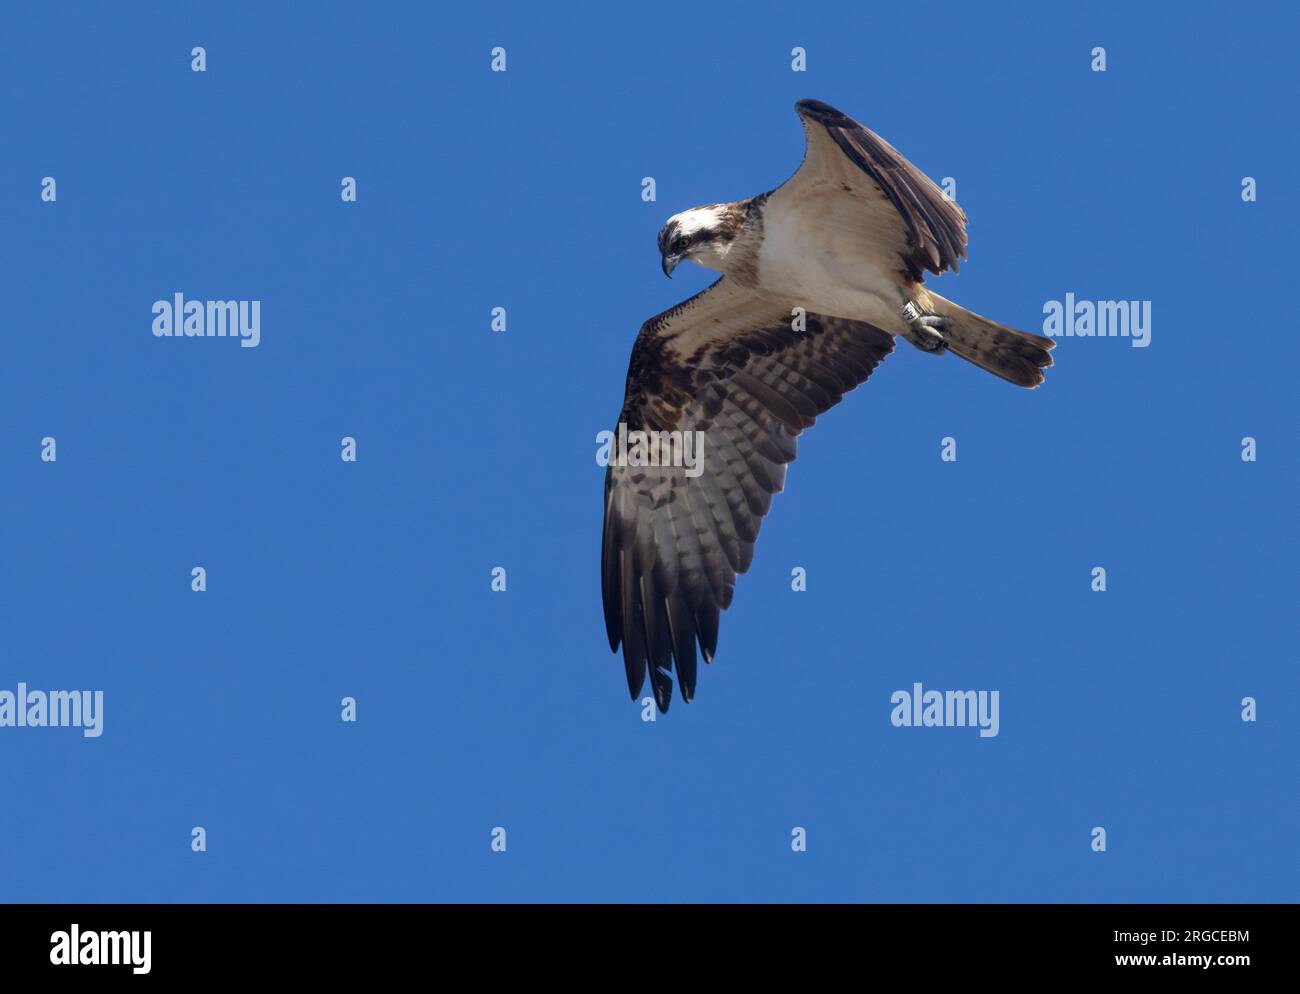 Osprey in flight with bright blue sky background Stock Photo